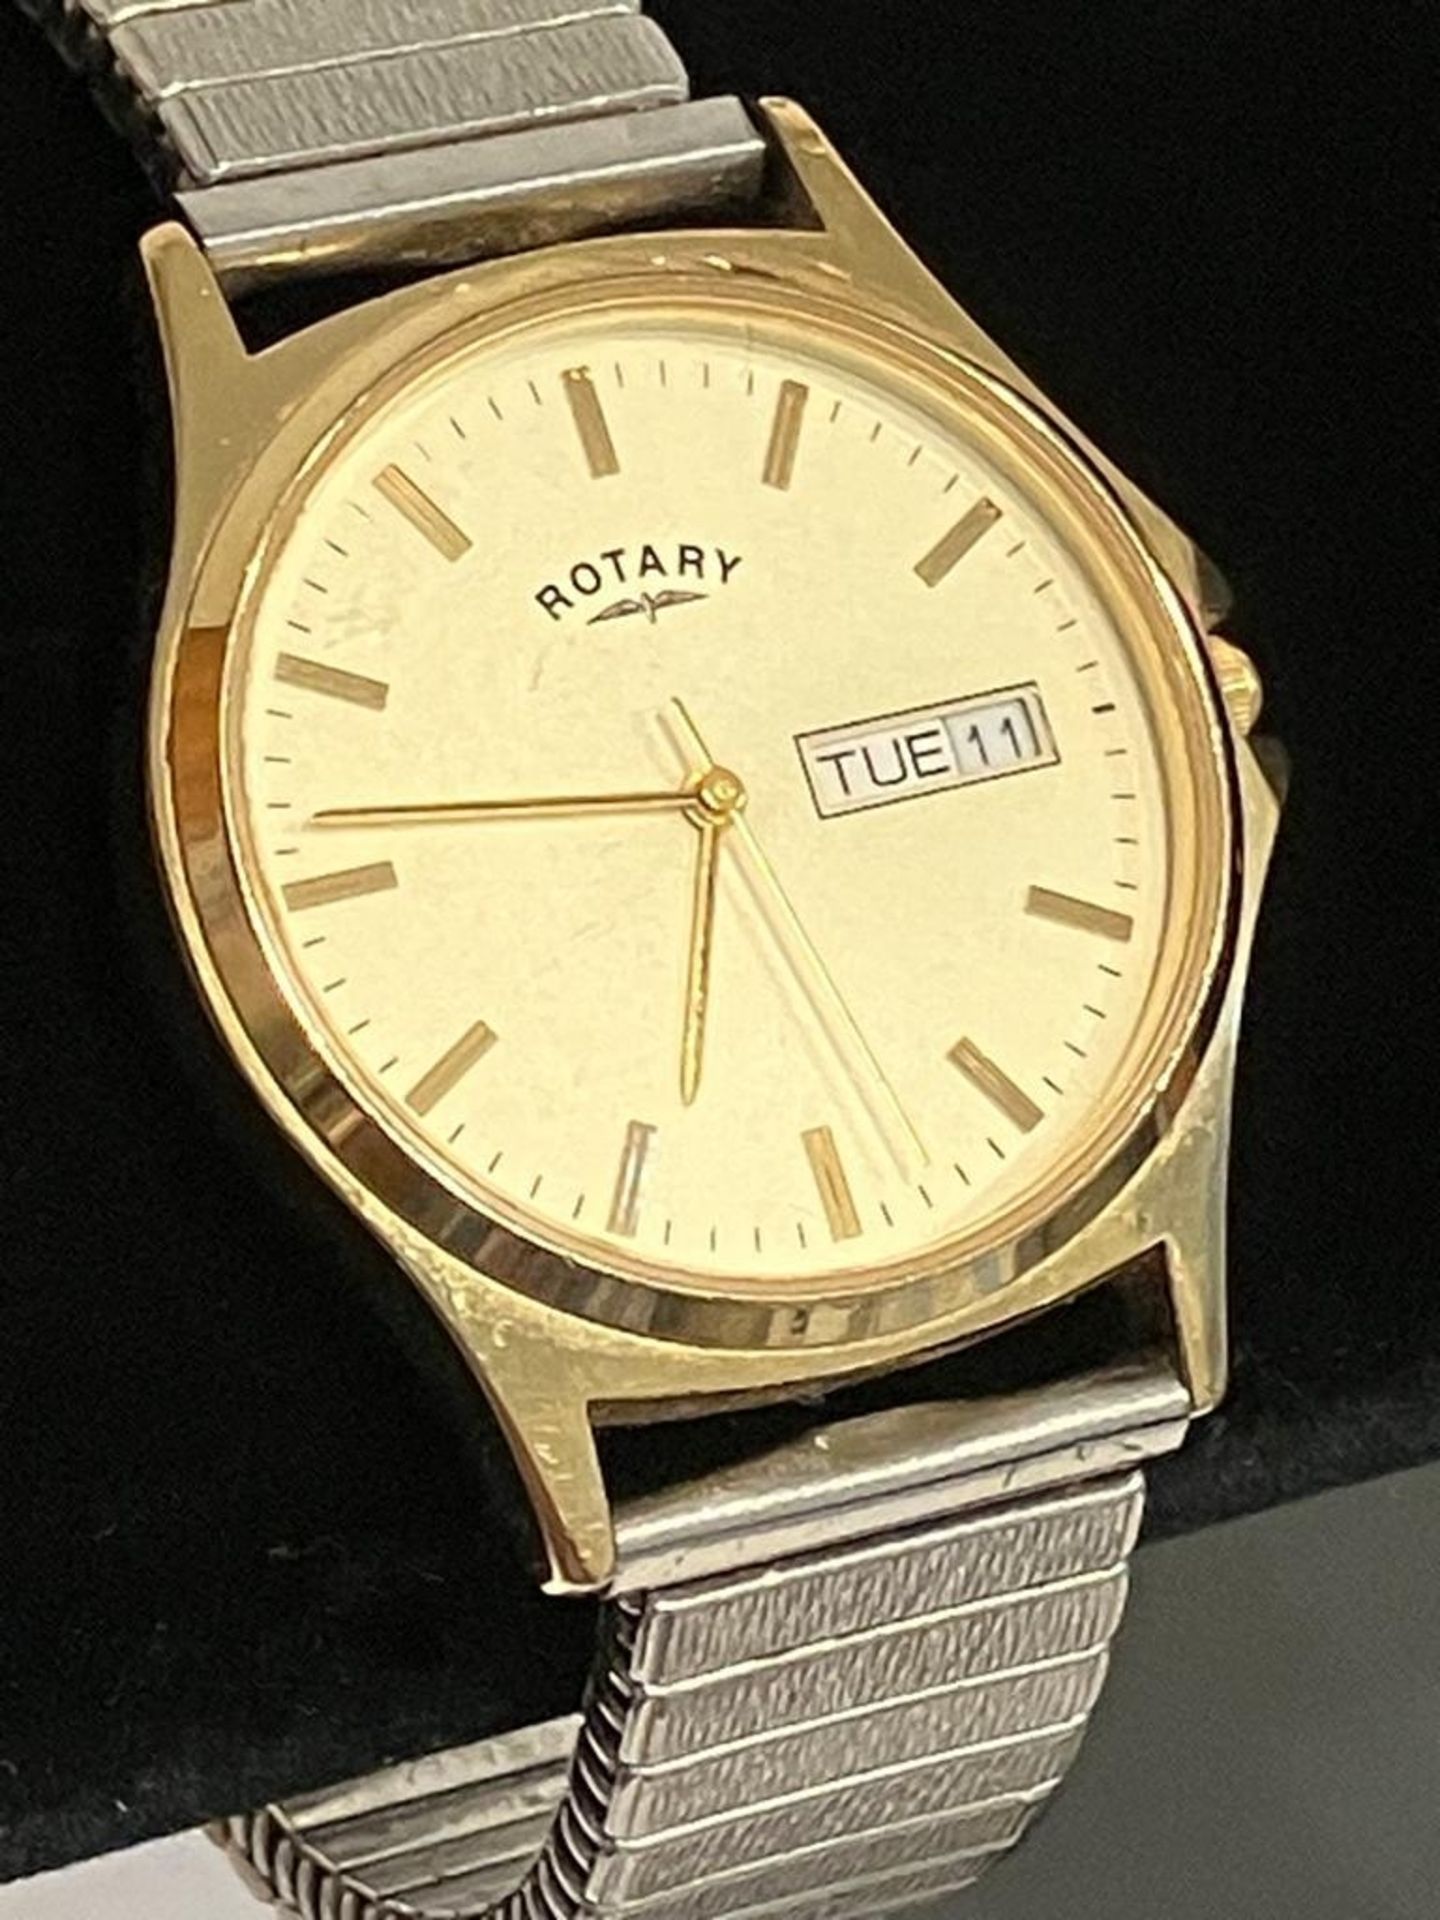 Gentlemans ROTARY WRISTWATCH DAY/DATE model in Gold Tone. Expandable bracelet. Quartz movement in